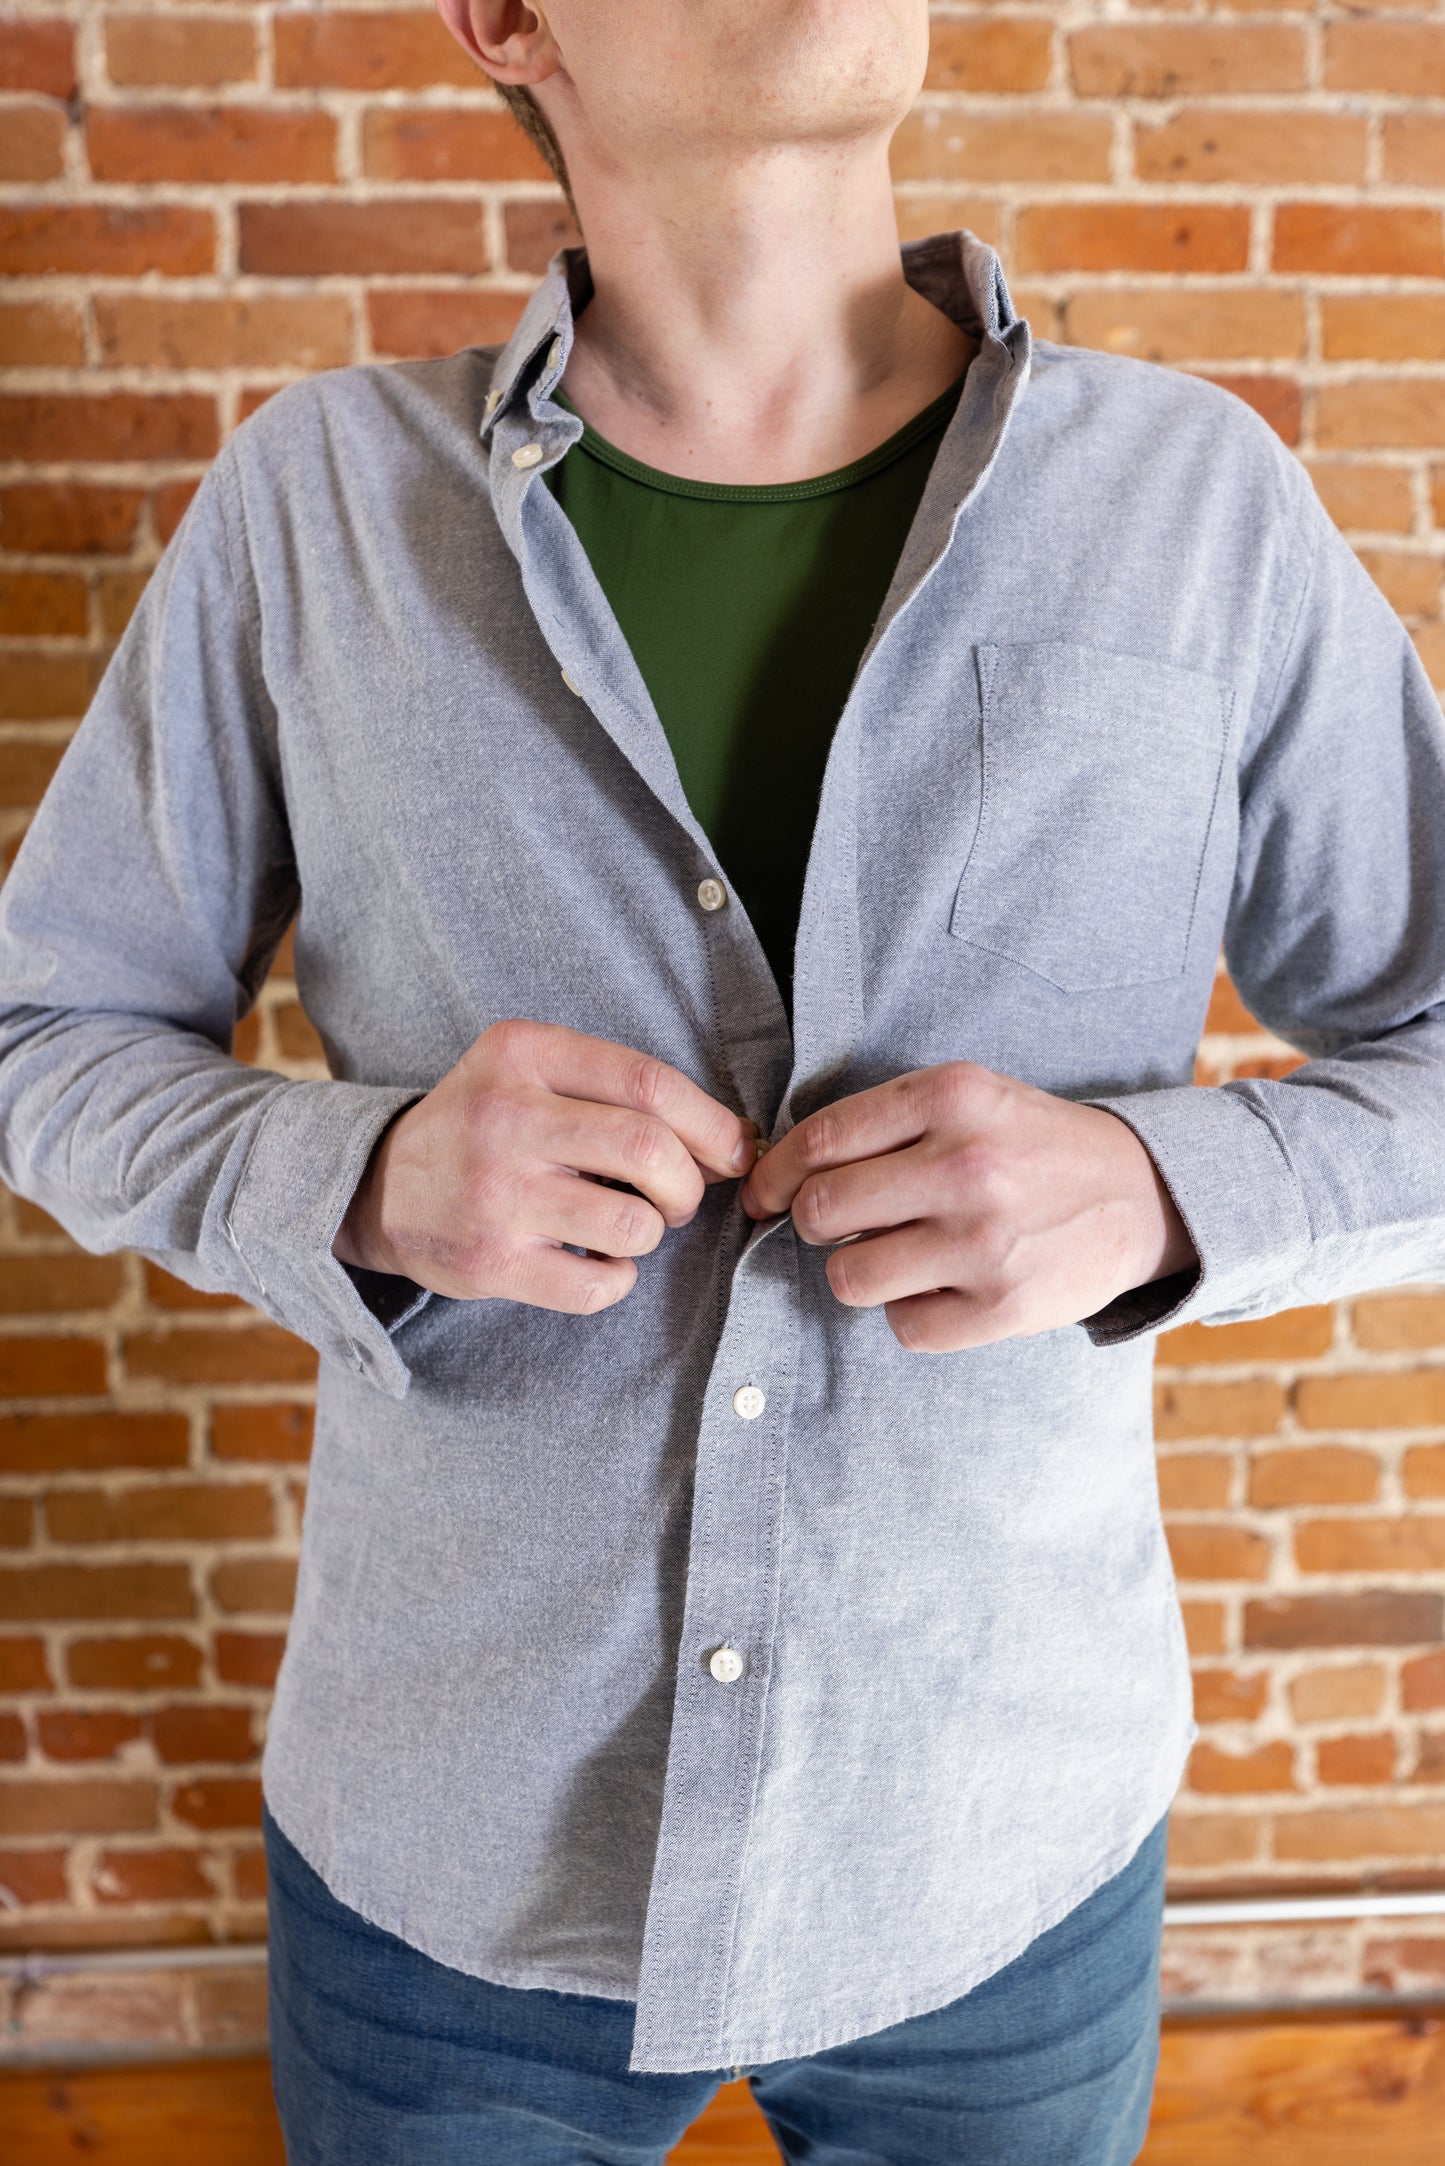 A white man buttons a light denim jacket over his olive-green tank top and denim jeans. He's by a brick background.